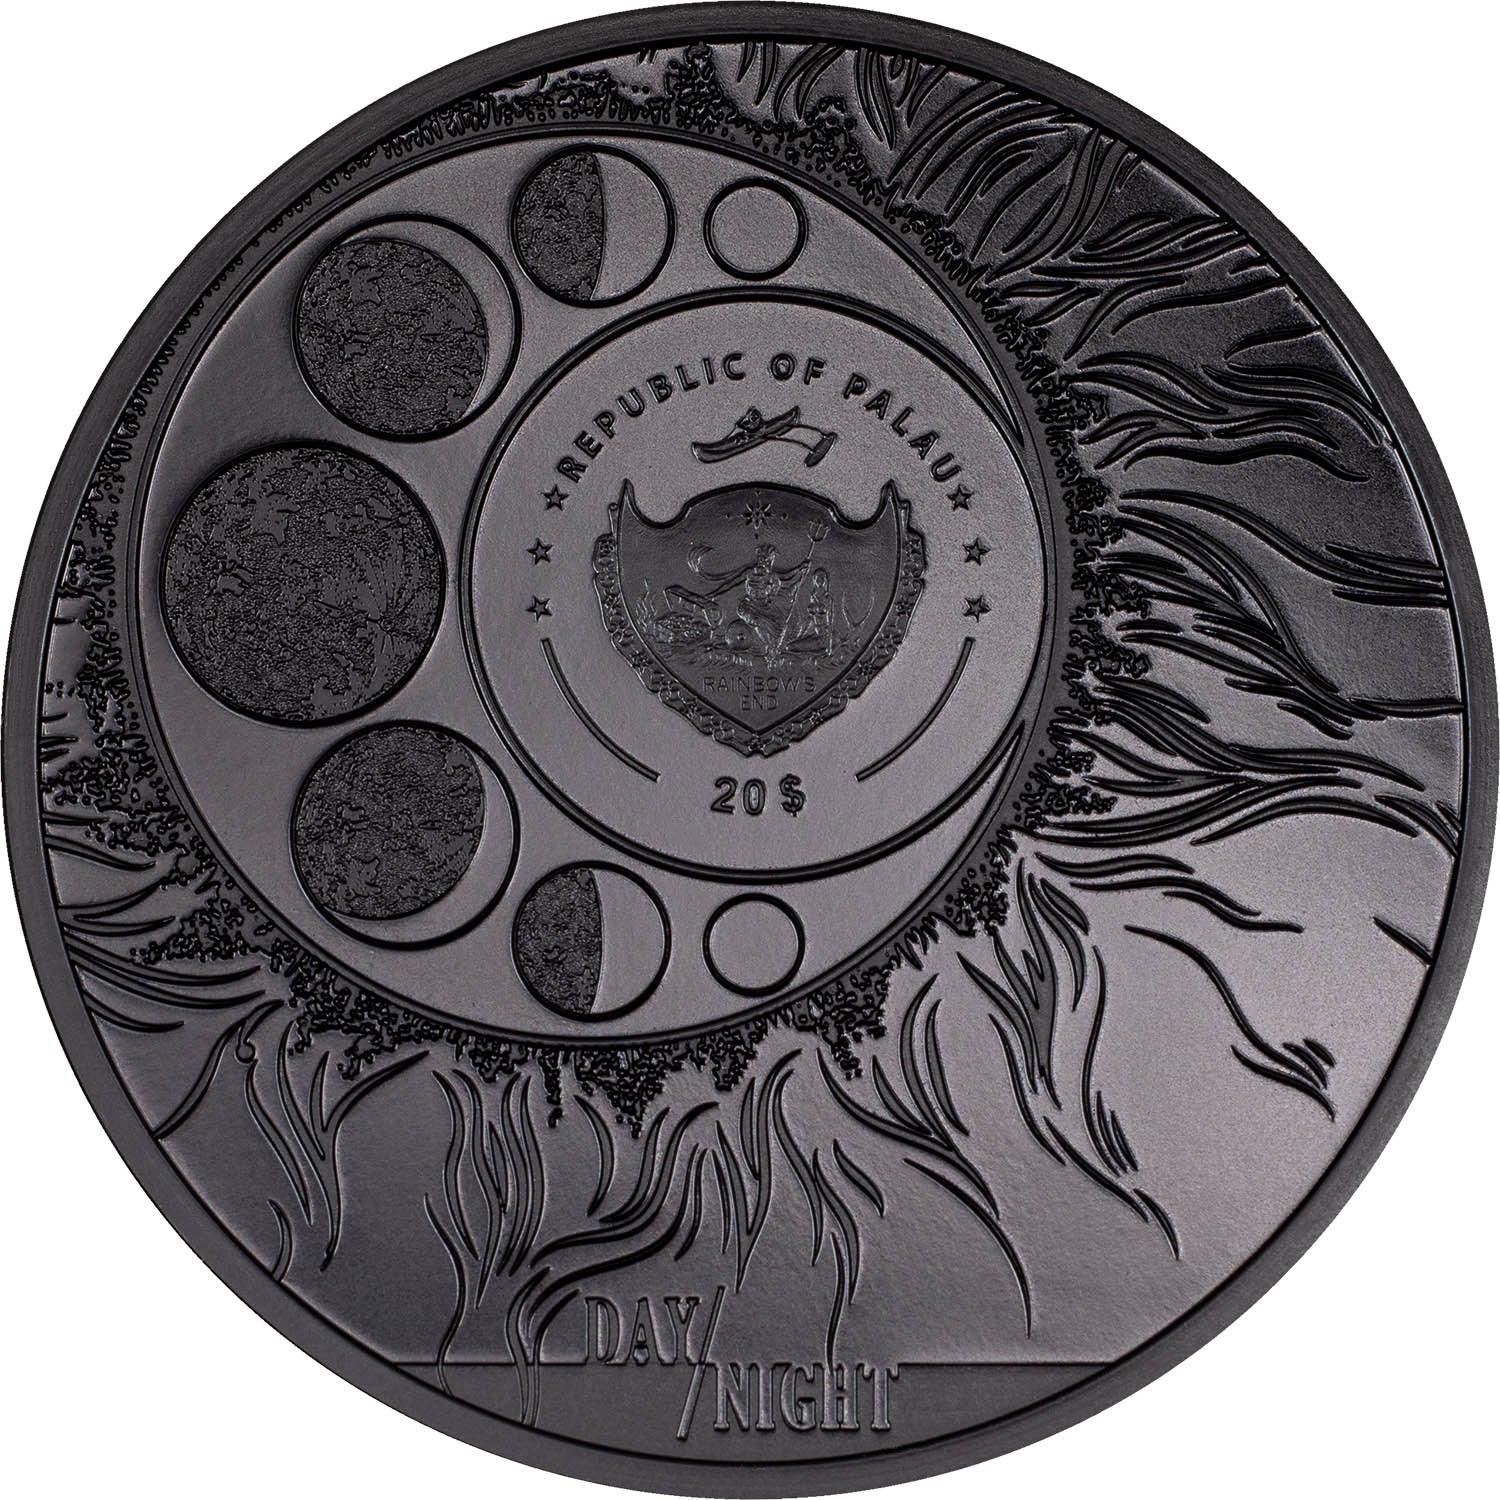 JAGUAR Day and Night 3 Oz Silver Coin $20 Palau 2023 - PARTHAVA COIN